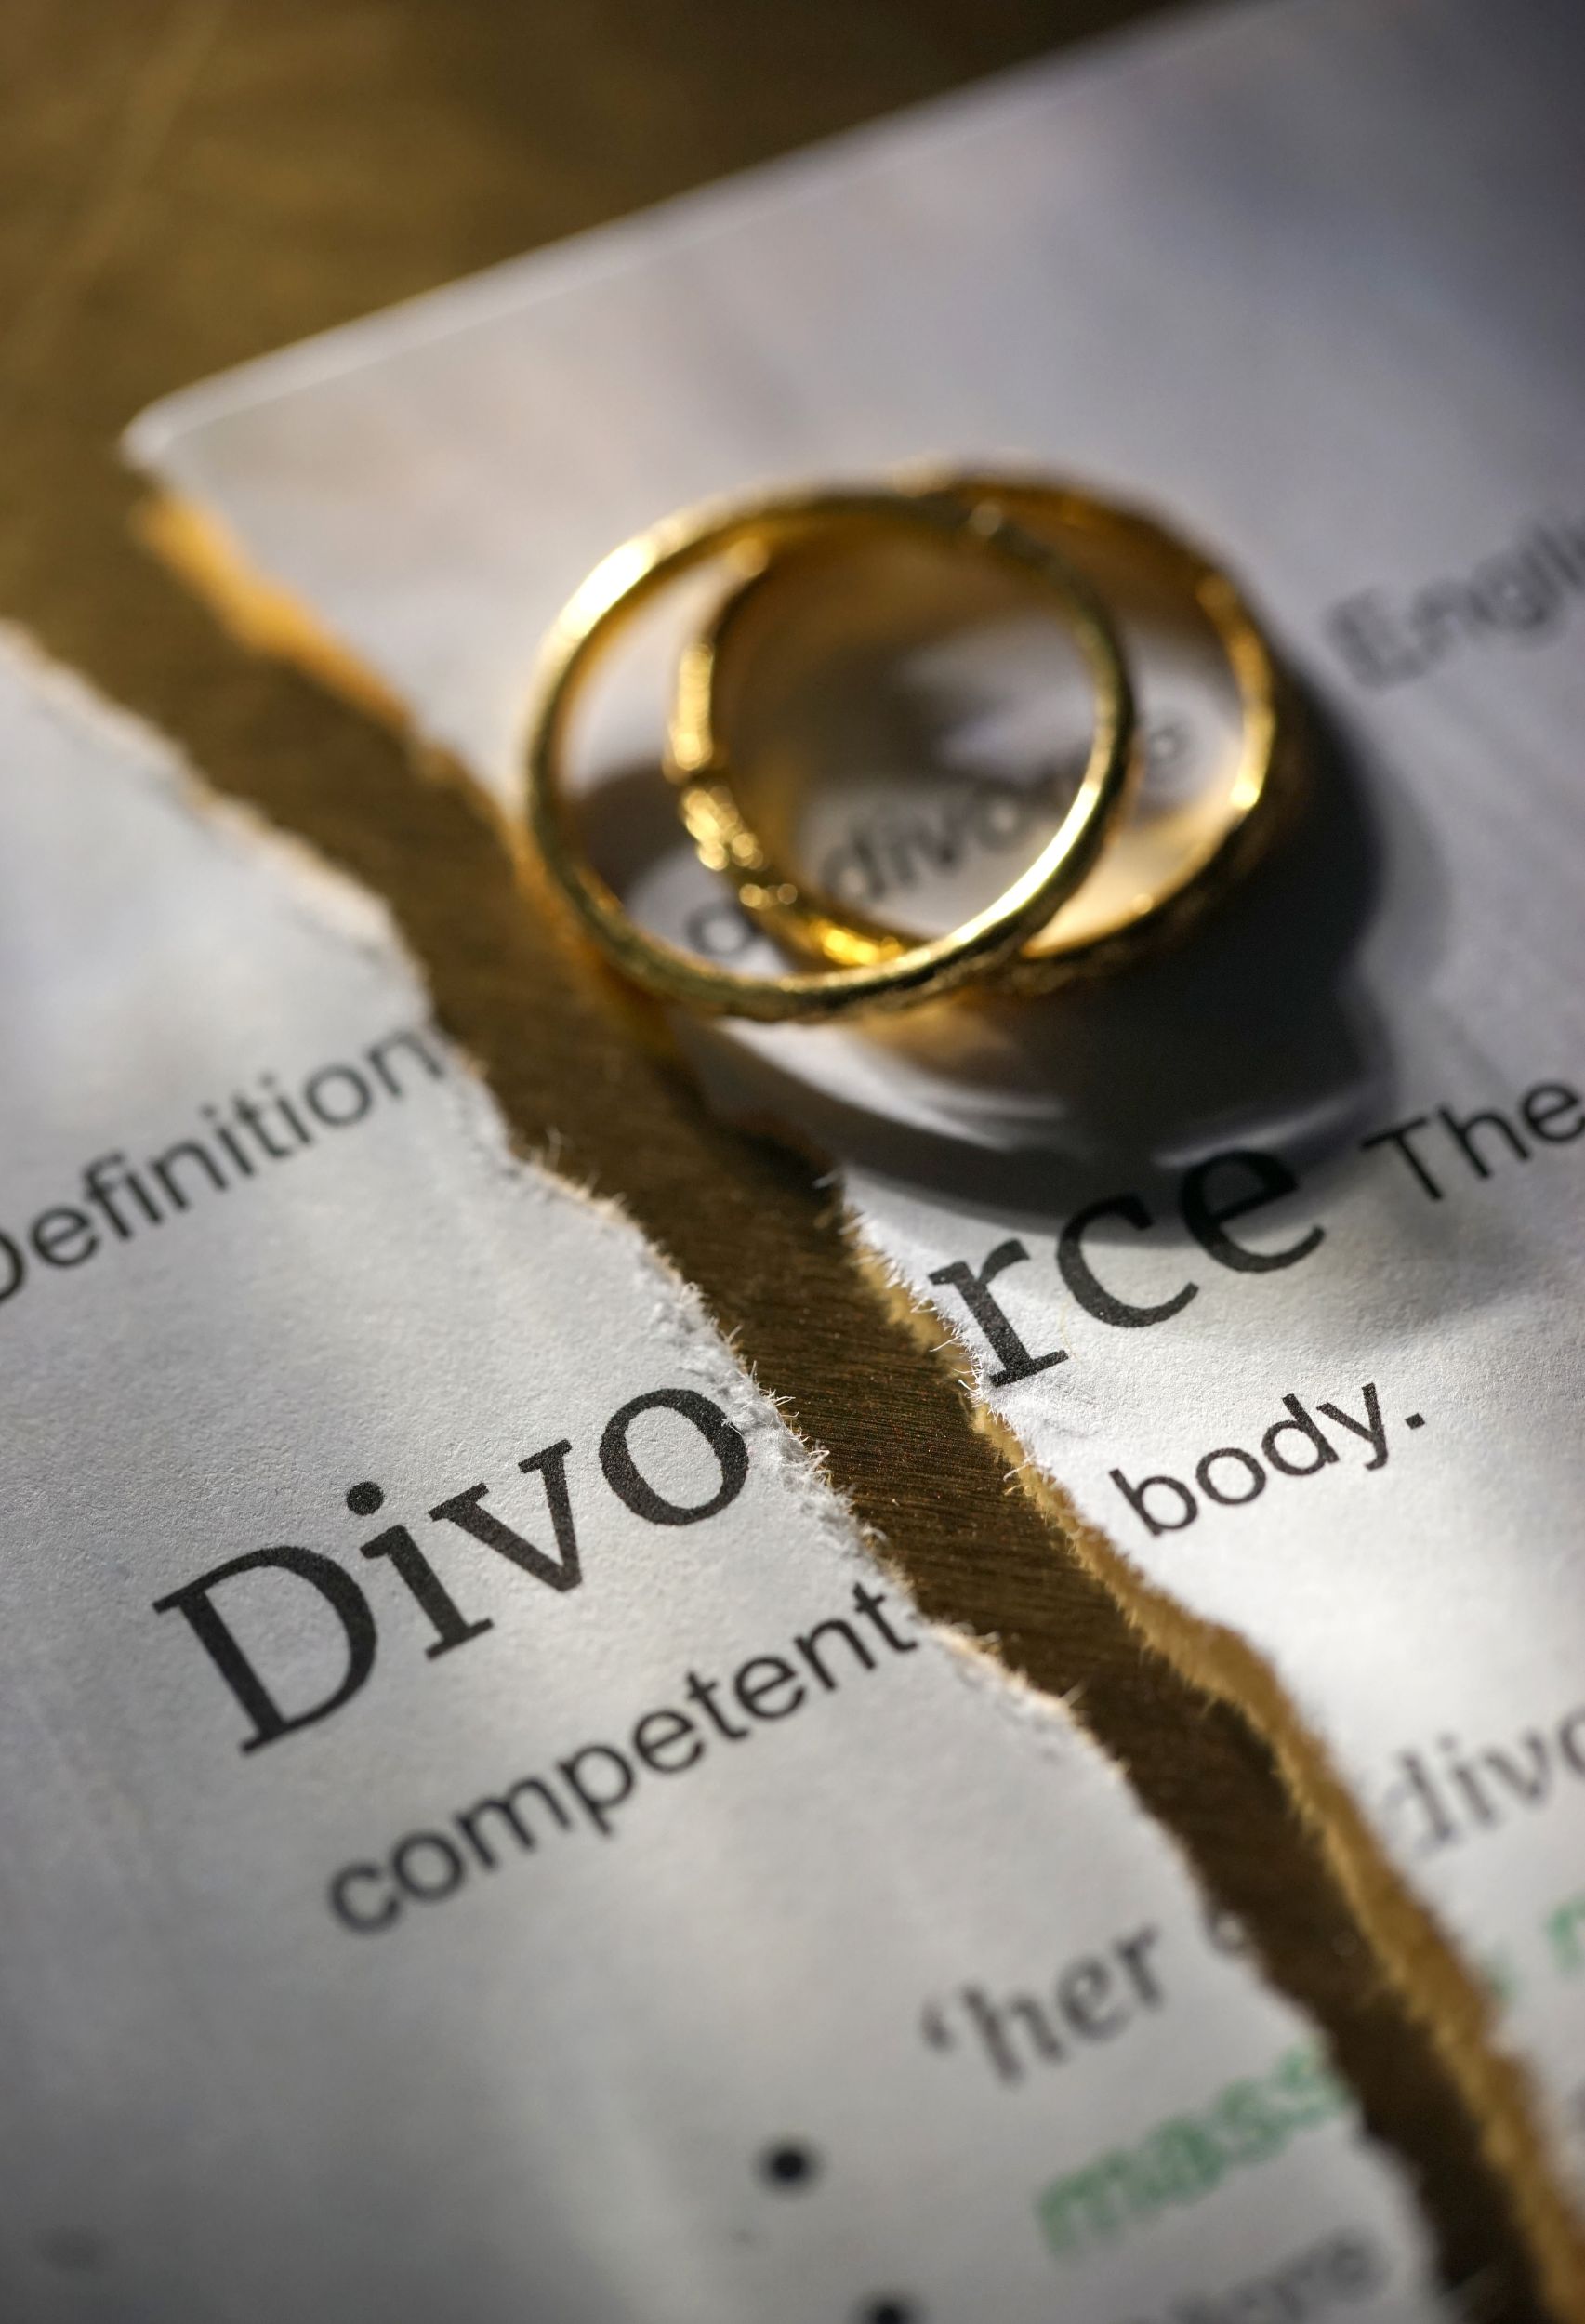 This Is How To Make Sure Your Divorce Goes As Smoothly As Possible